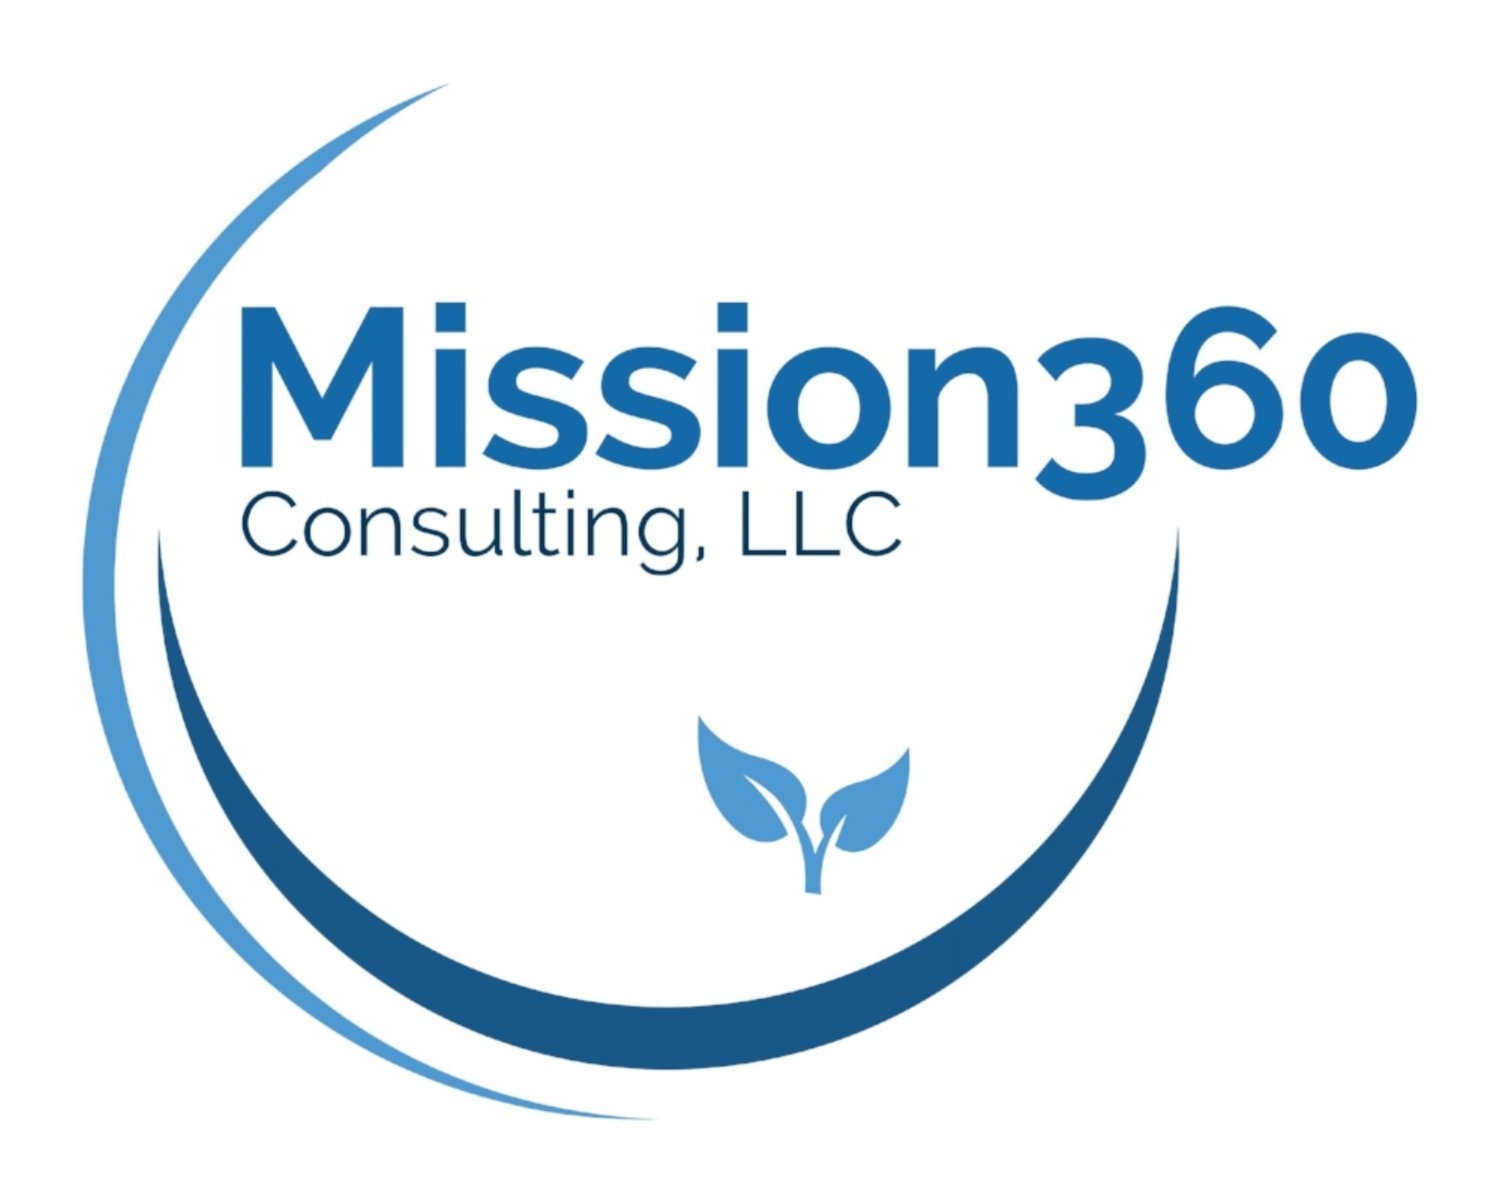 Mission360 Consulting, LLC